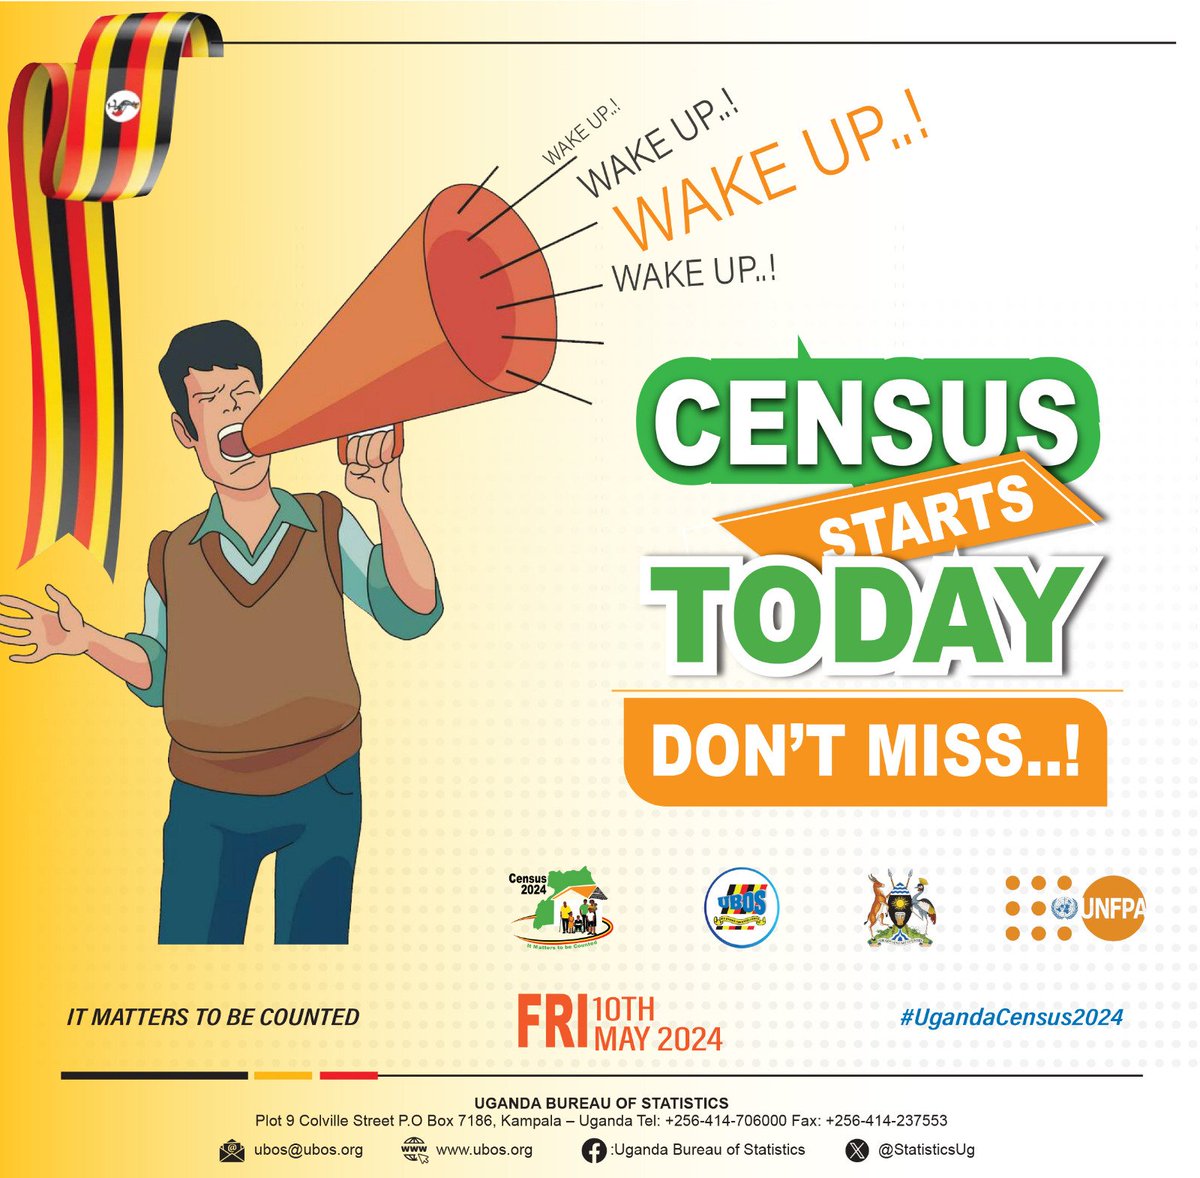 #Babafmupdates @StatisticsUg has today kicked off the National Census till 19th May intended to gather social & demographic data for proper govt planning. The last census was carried out in 2014 & the popn was 34,634,650 persons with females standing at 51%. #Ekitudha #NdiMunda